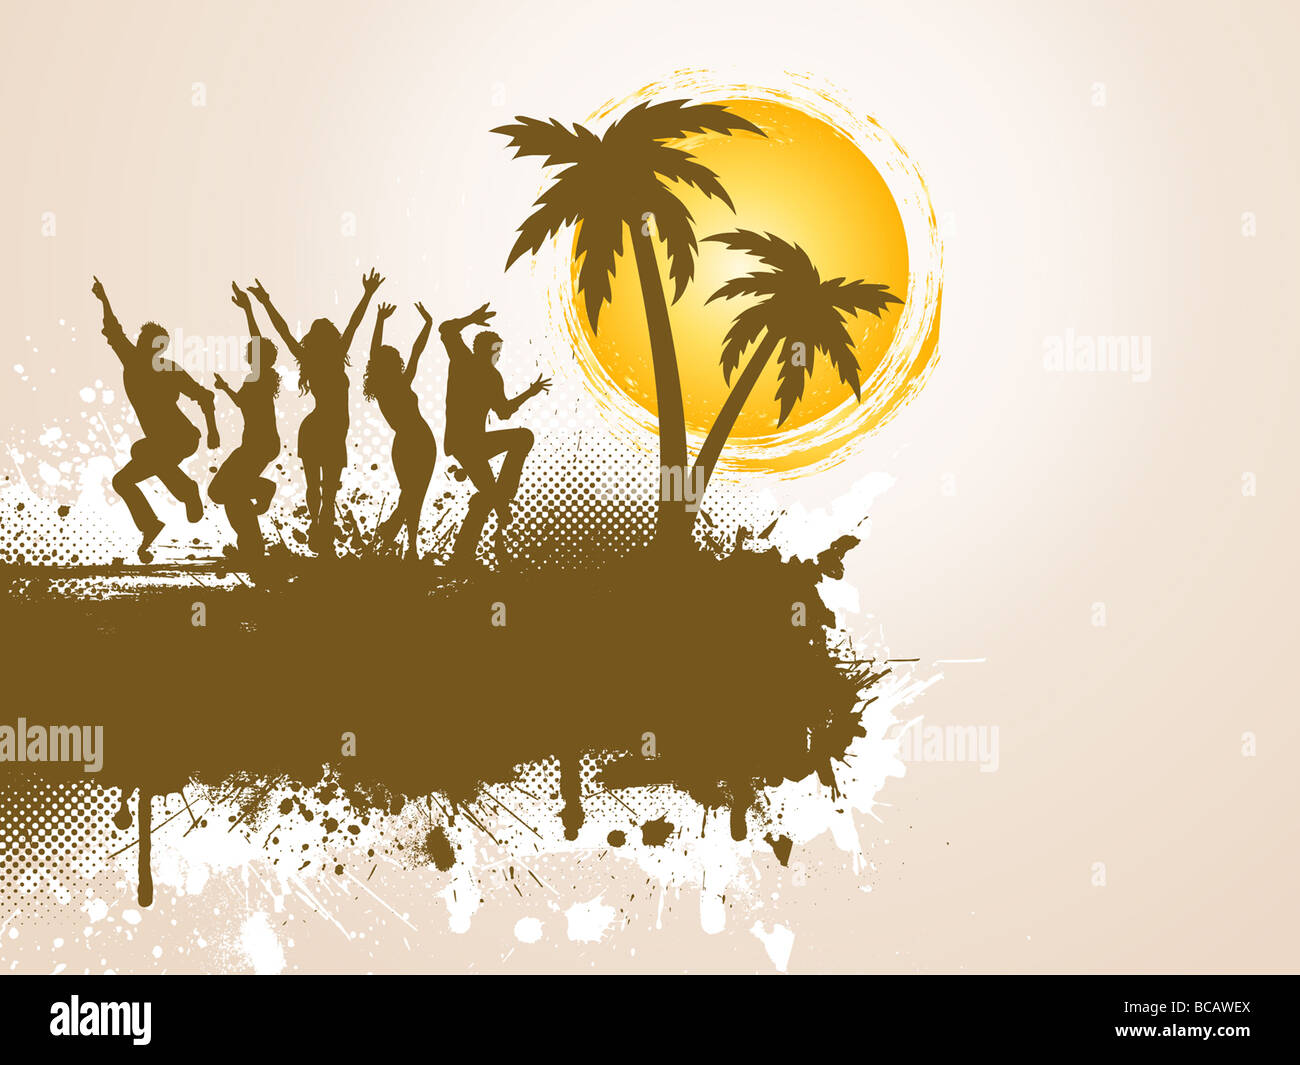 Silhouettes of people dancing on grunge palm tree background Stock Photo